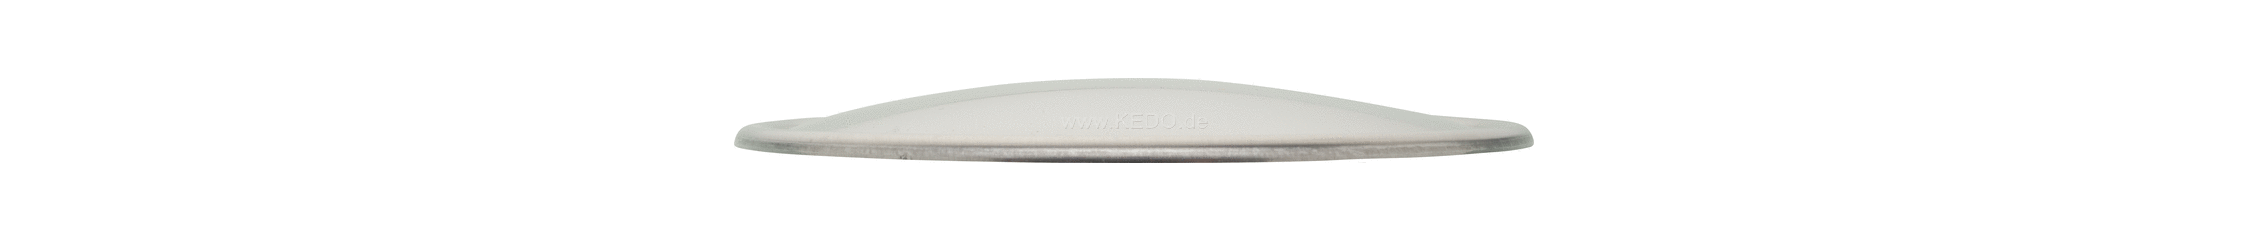 Kedo Starting Number Plate / Side Cover 'NEO', deep drawn, 1mm aluminum untreated, Circumferential bead, 1 piece dim. approx. 220x150mm | 60618